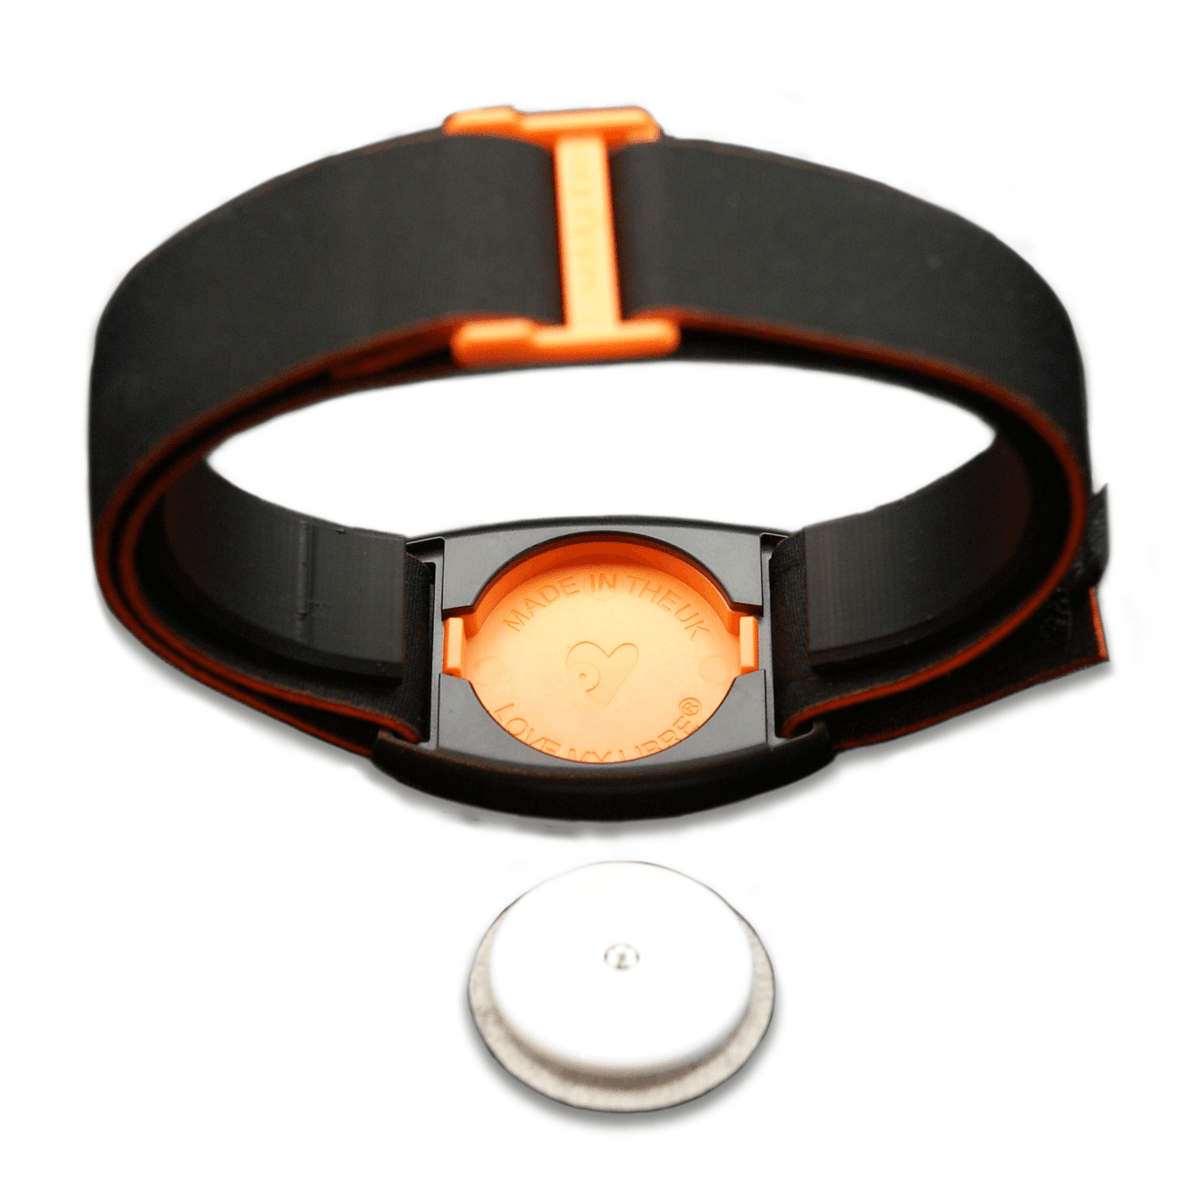 Libreband Armband in reverse with orange cover. Shown with Freestyle Libre 2 sensor.